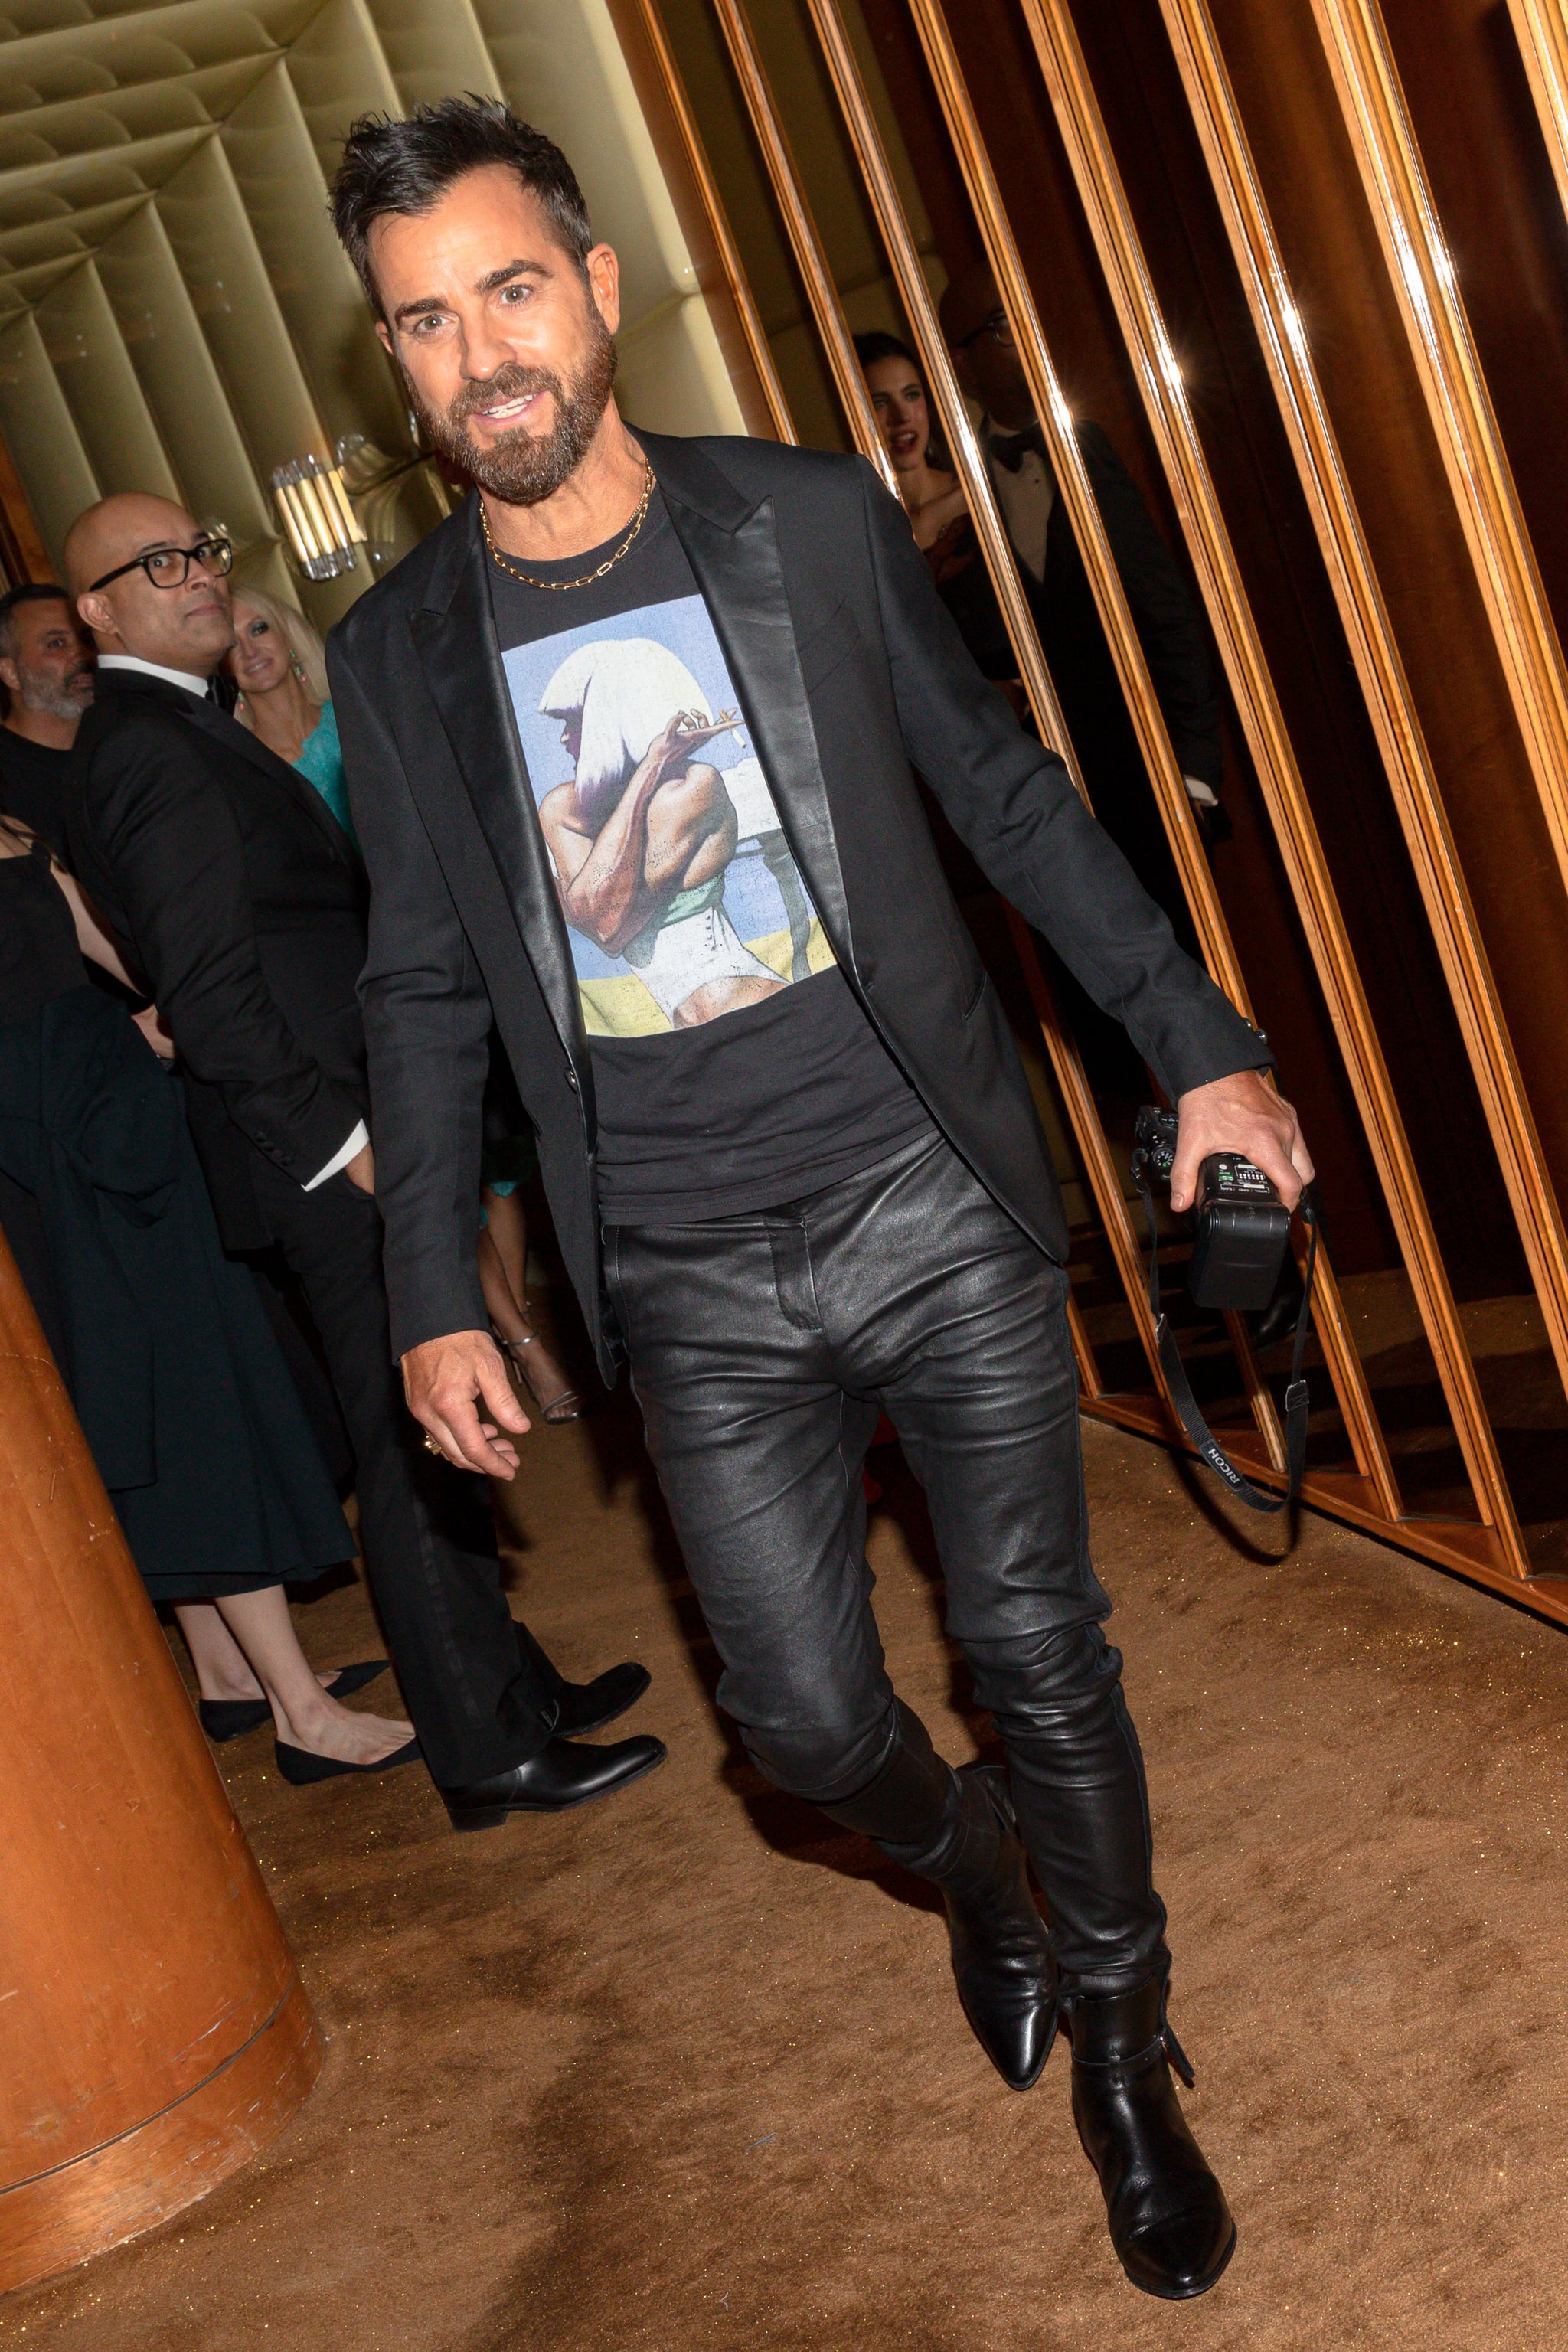 Nina Dobrev, Justin Theroux, & More Celebs Attend Louis Vuitton's